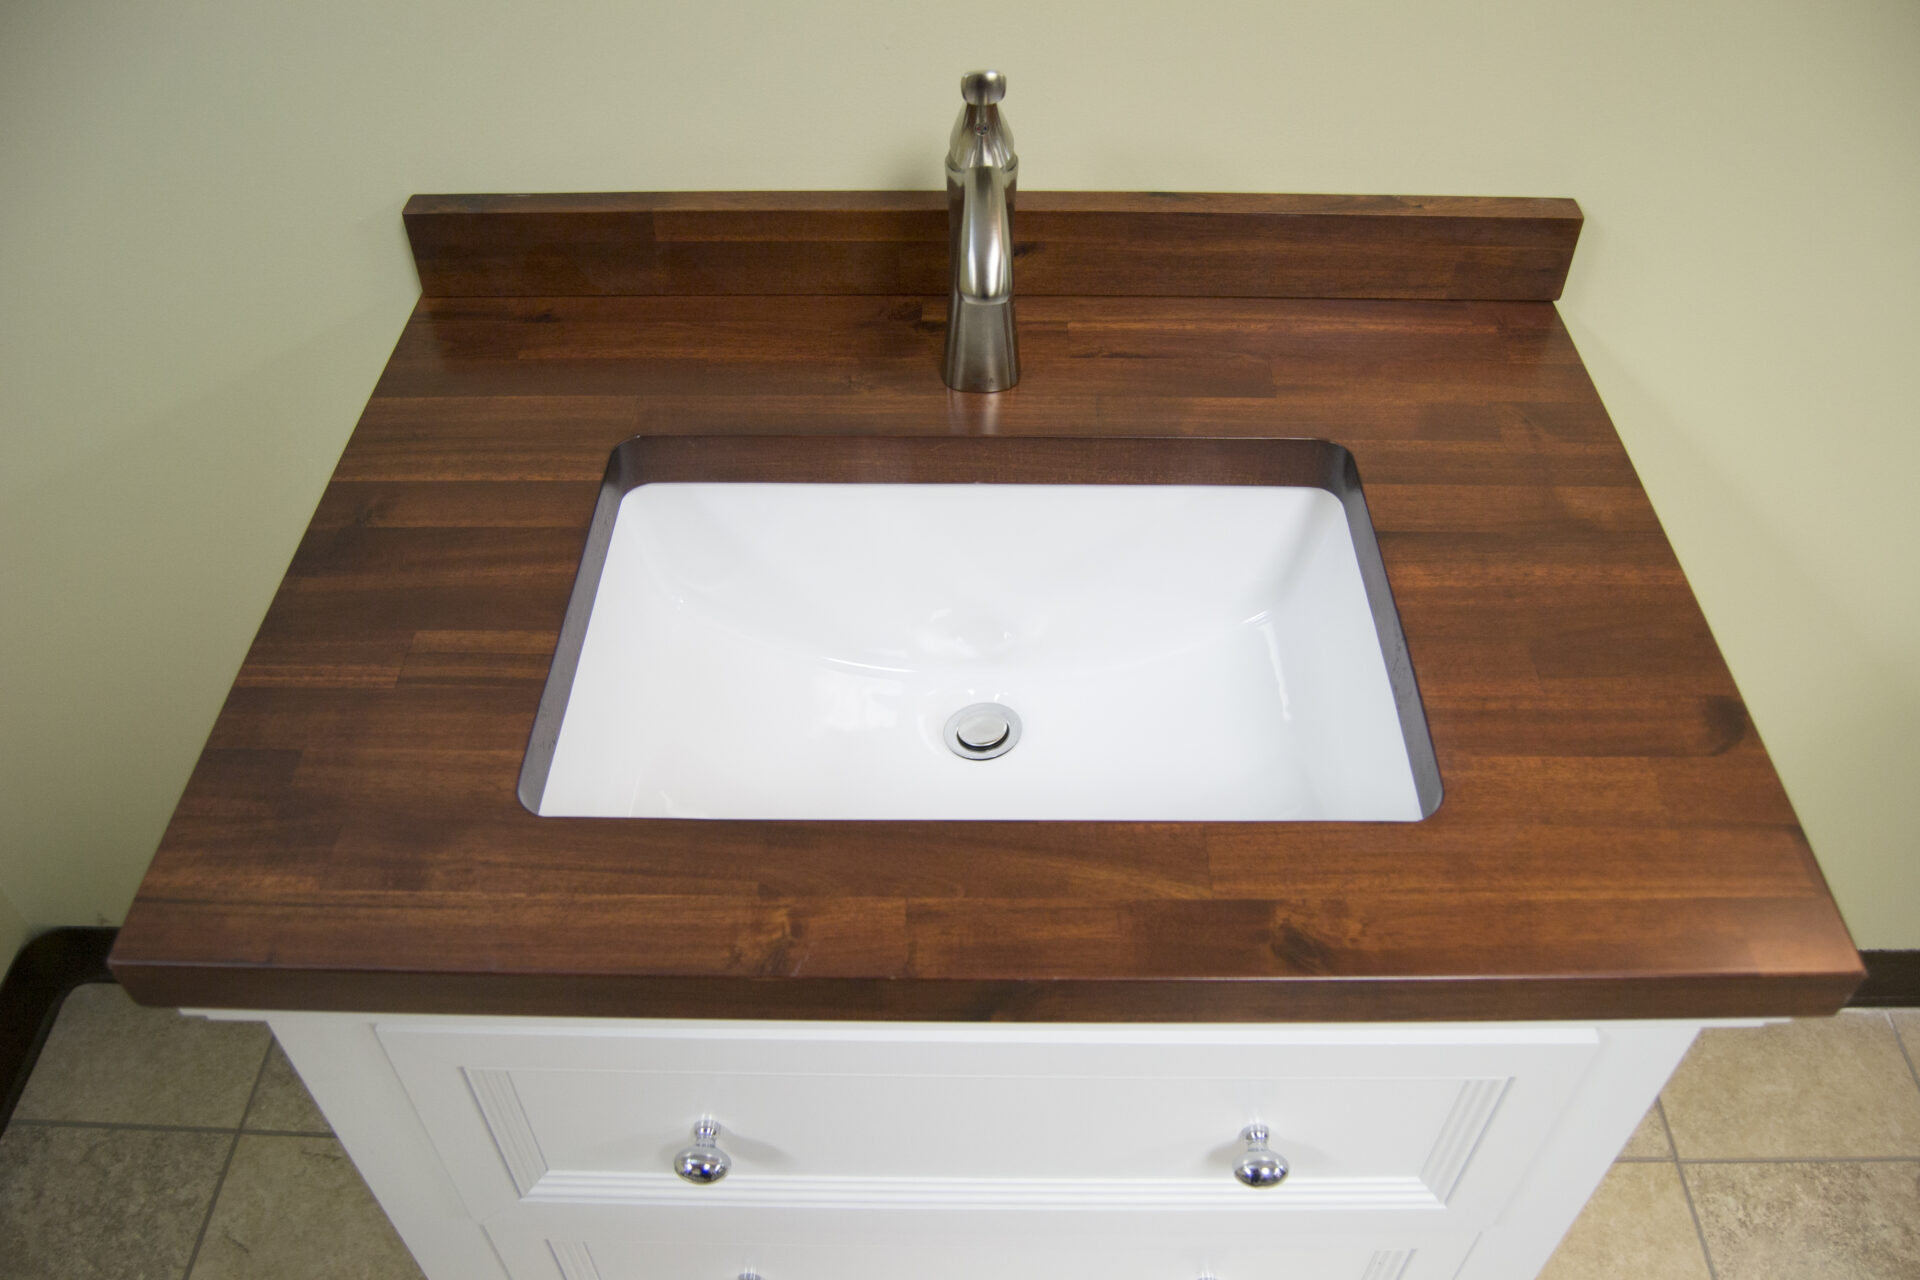 Madera Cherry Sink with wooden cabinet